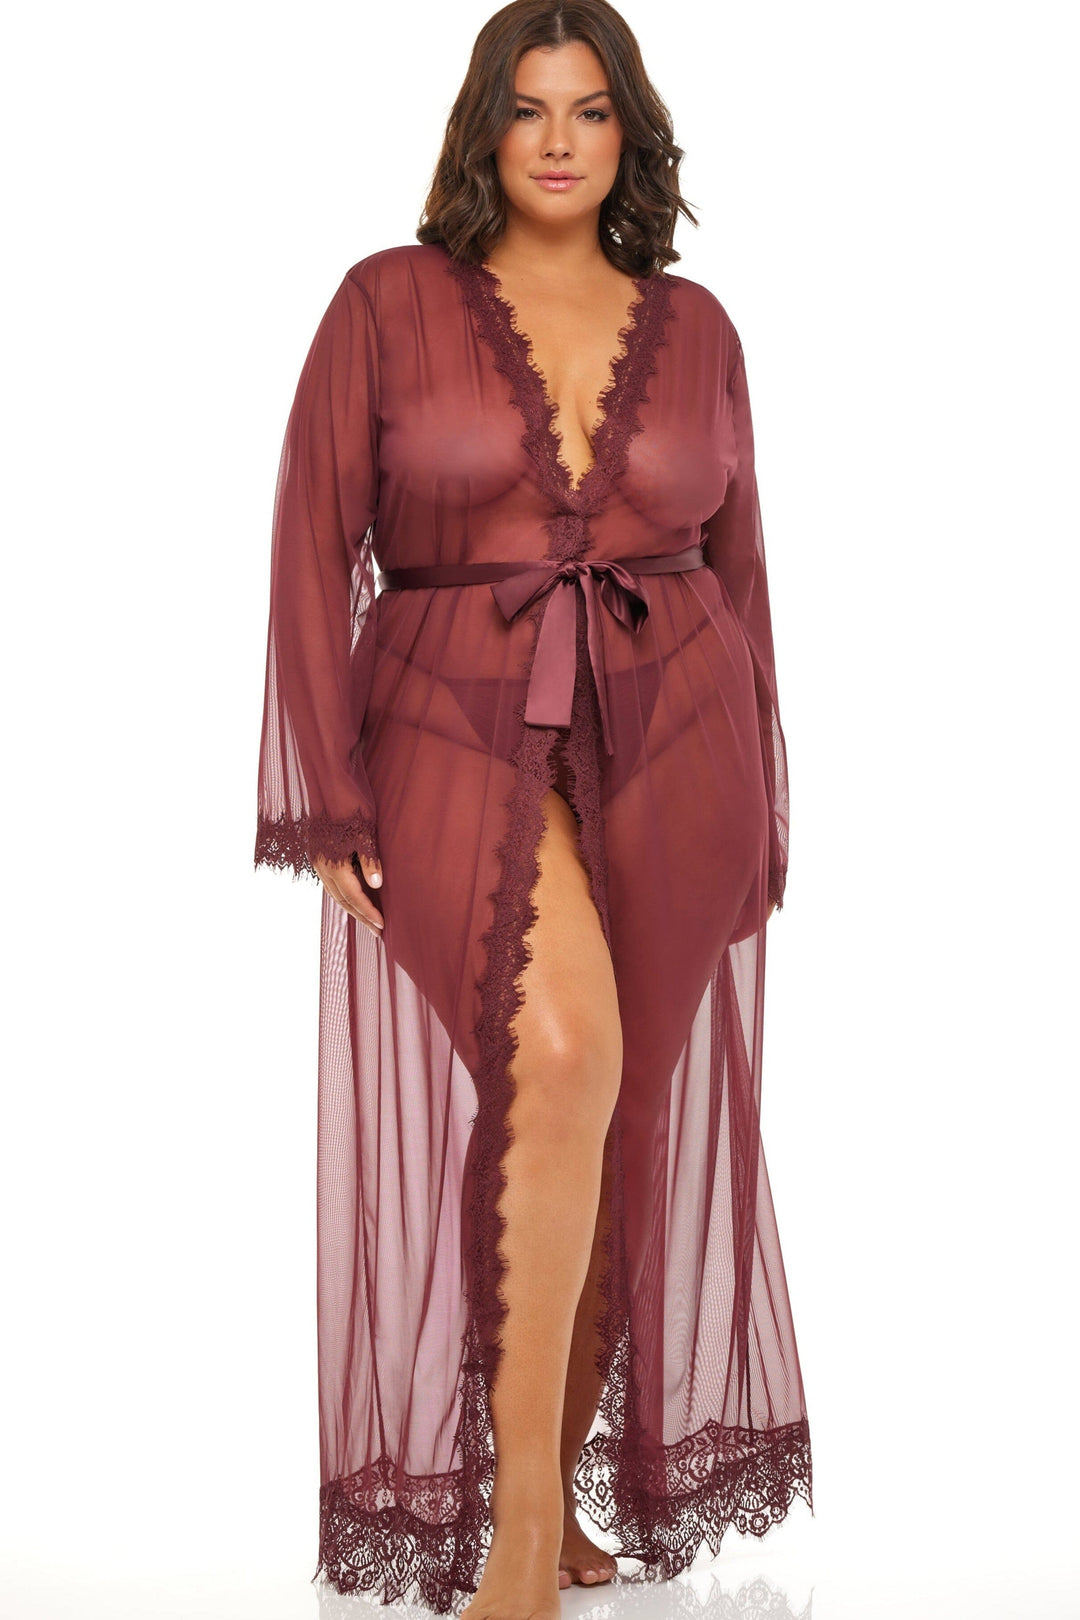 Eyelash Lace Floor Length Robe With Satin Sash-Gowns + Robes-Oh La La Cheri-Red-1/2XL-SEXYSHOES.COM